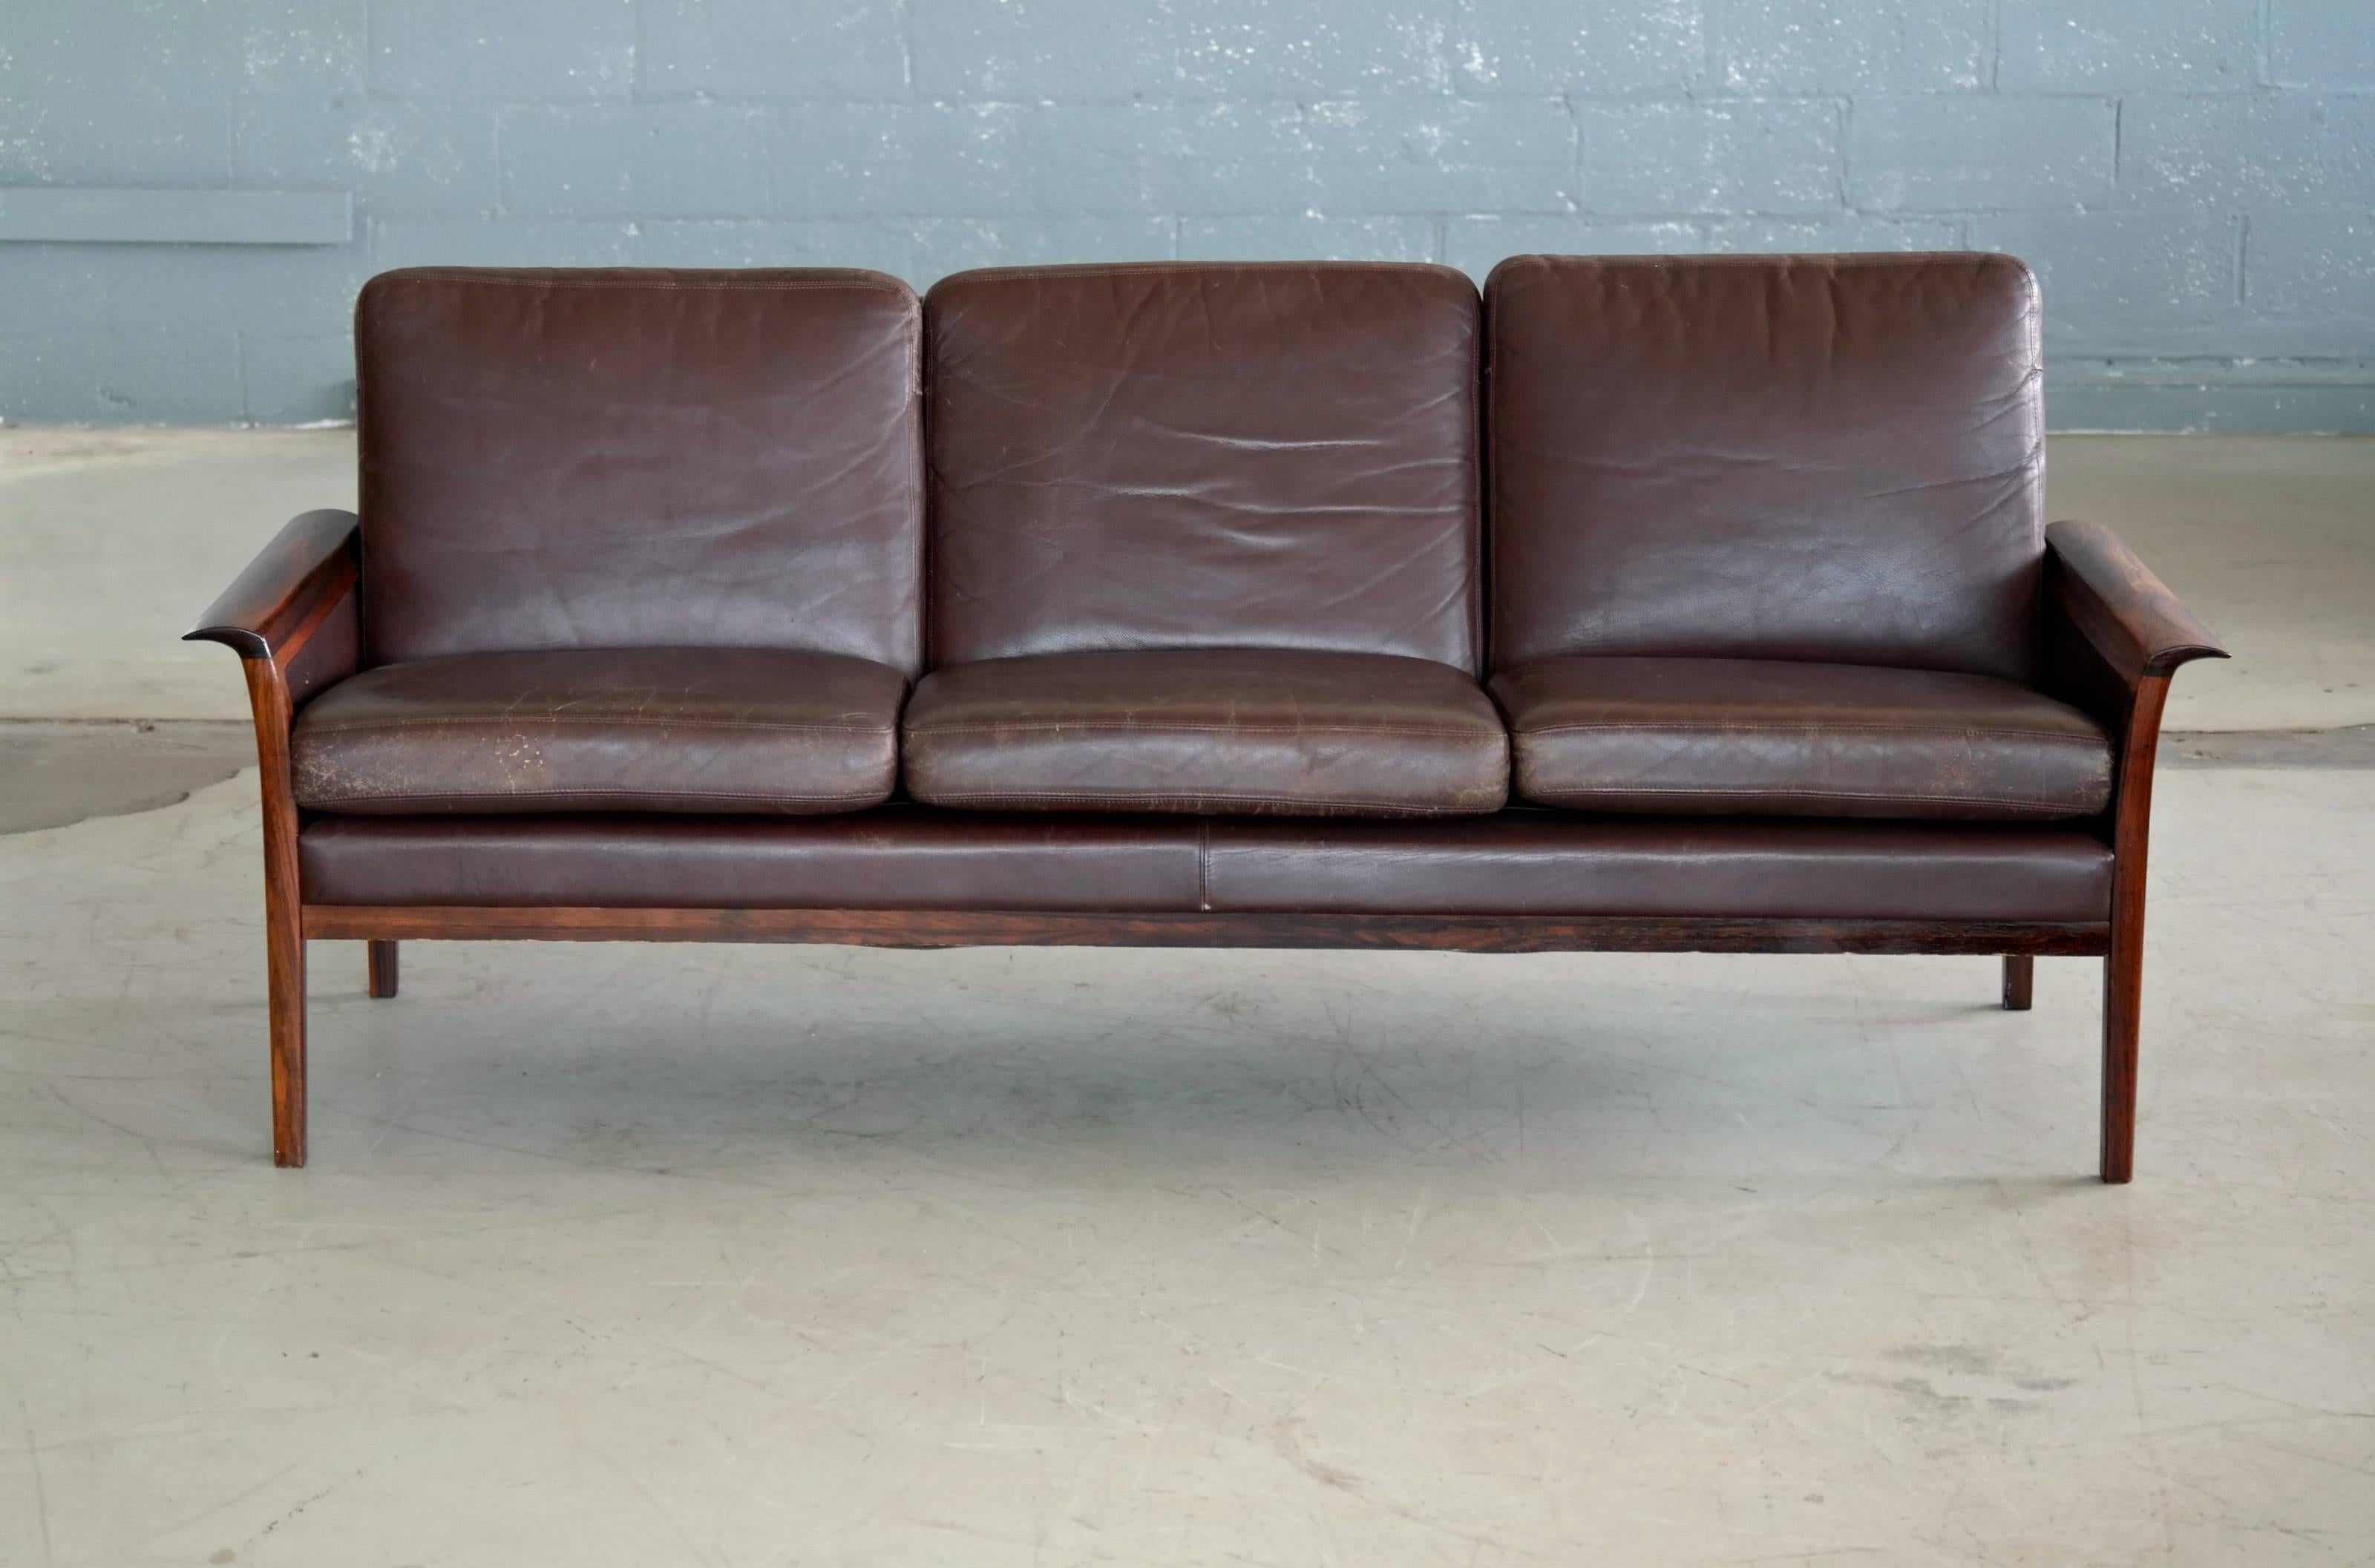 Scandinavian Modern Three-Seat Sofa in Cordovan Leather and Rosewood by Hans Olsen for Vatne, Norway